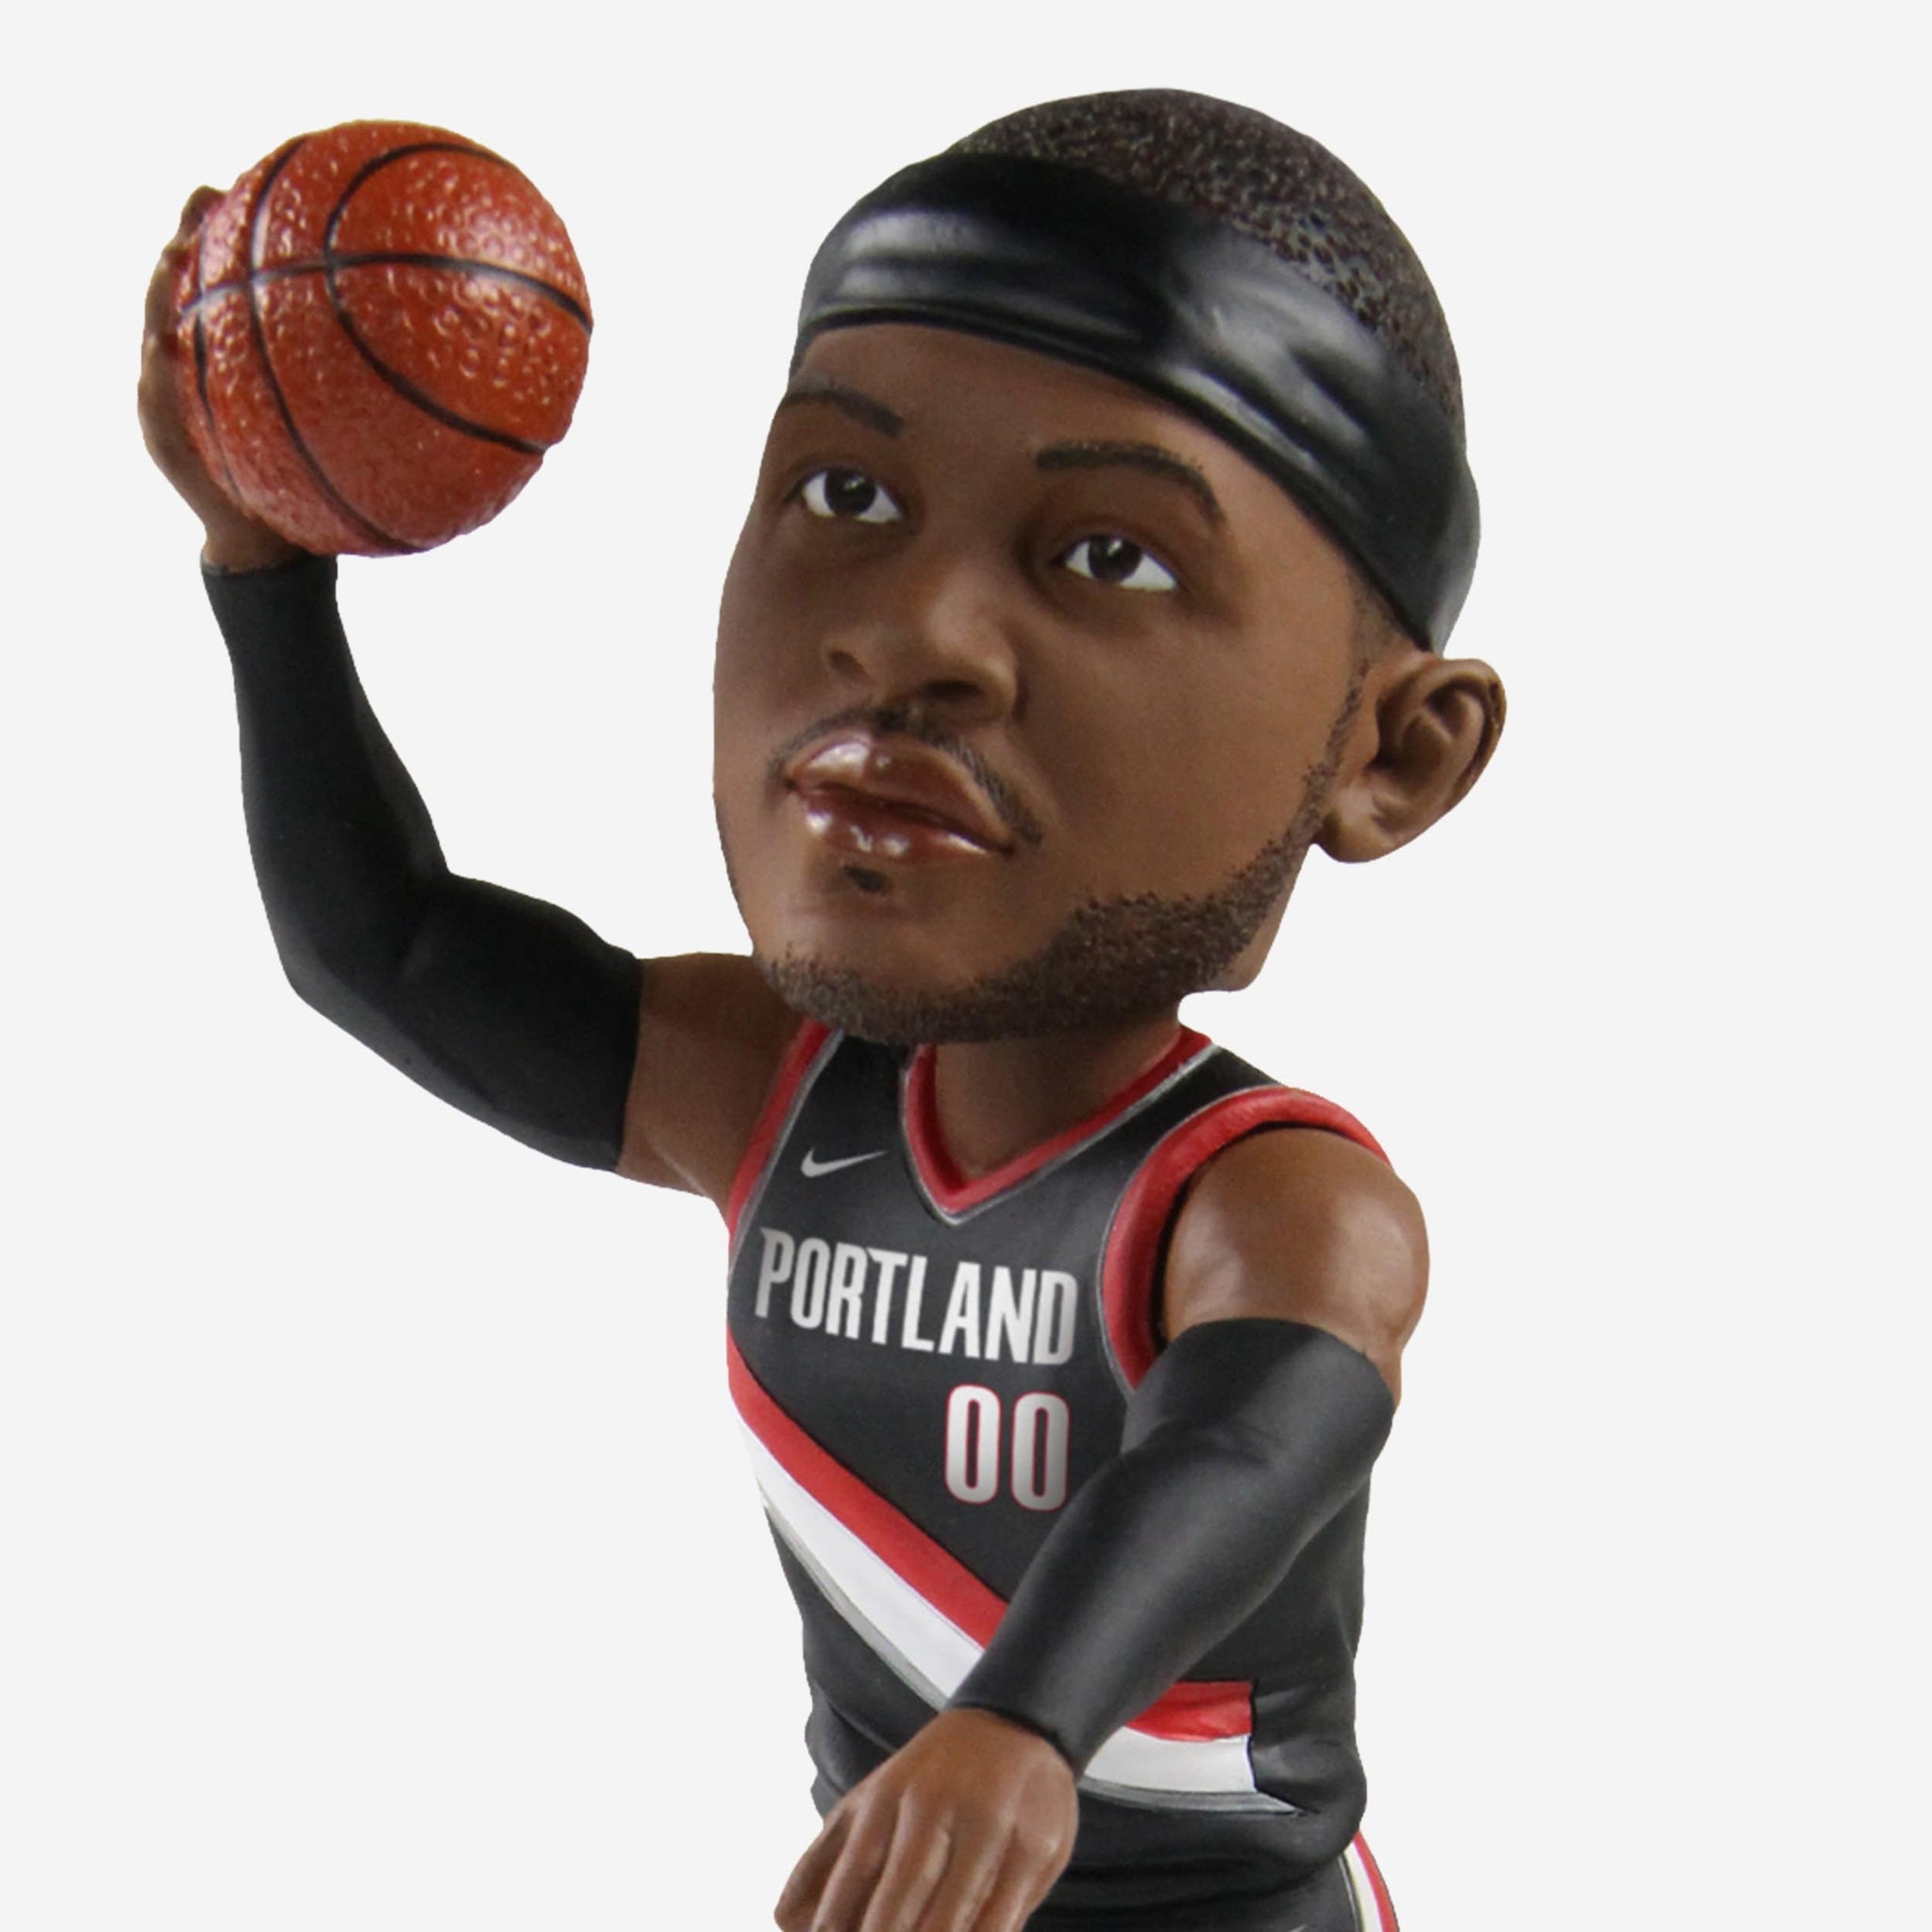 Carmelo Anthony Portland Trail Blazers jerseys are already available for  sale online 